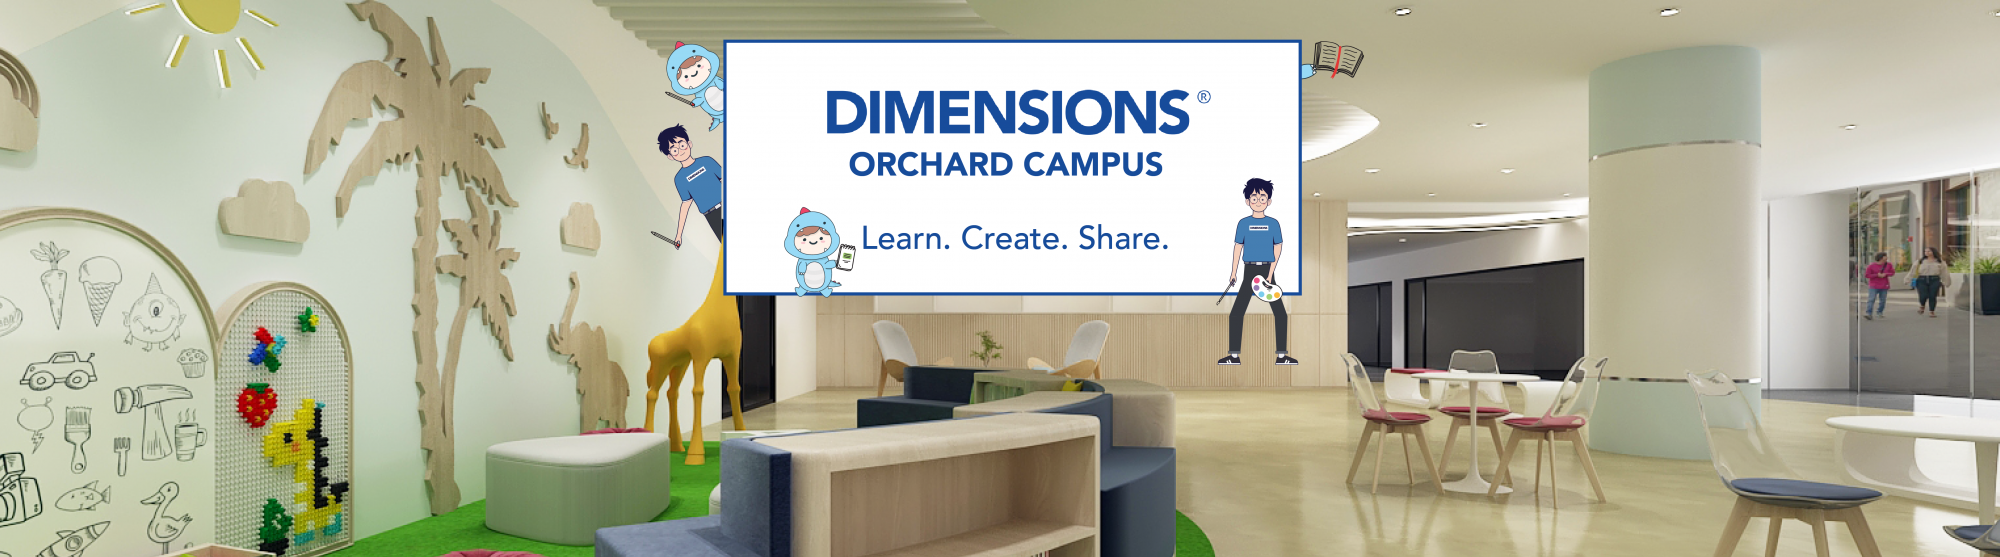 dimensions orchard campus